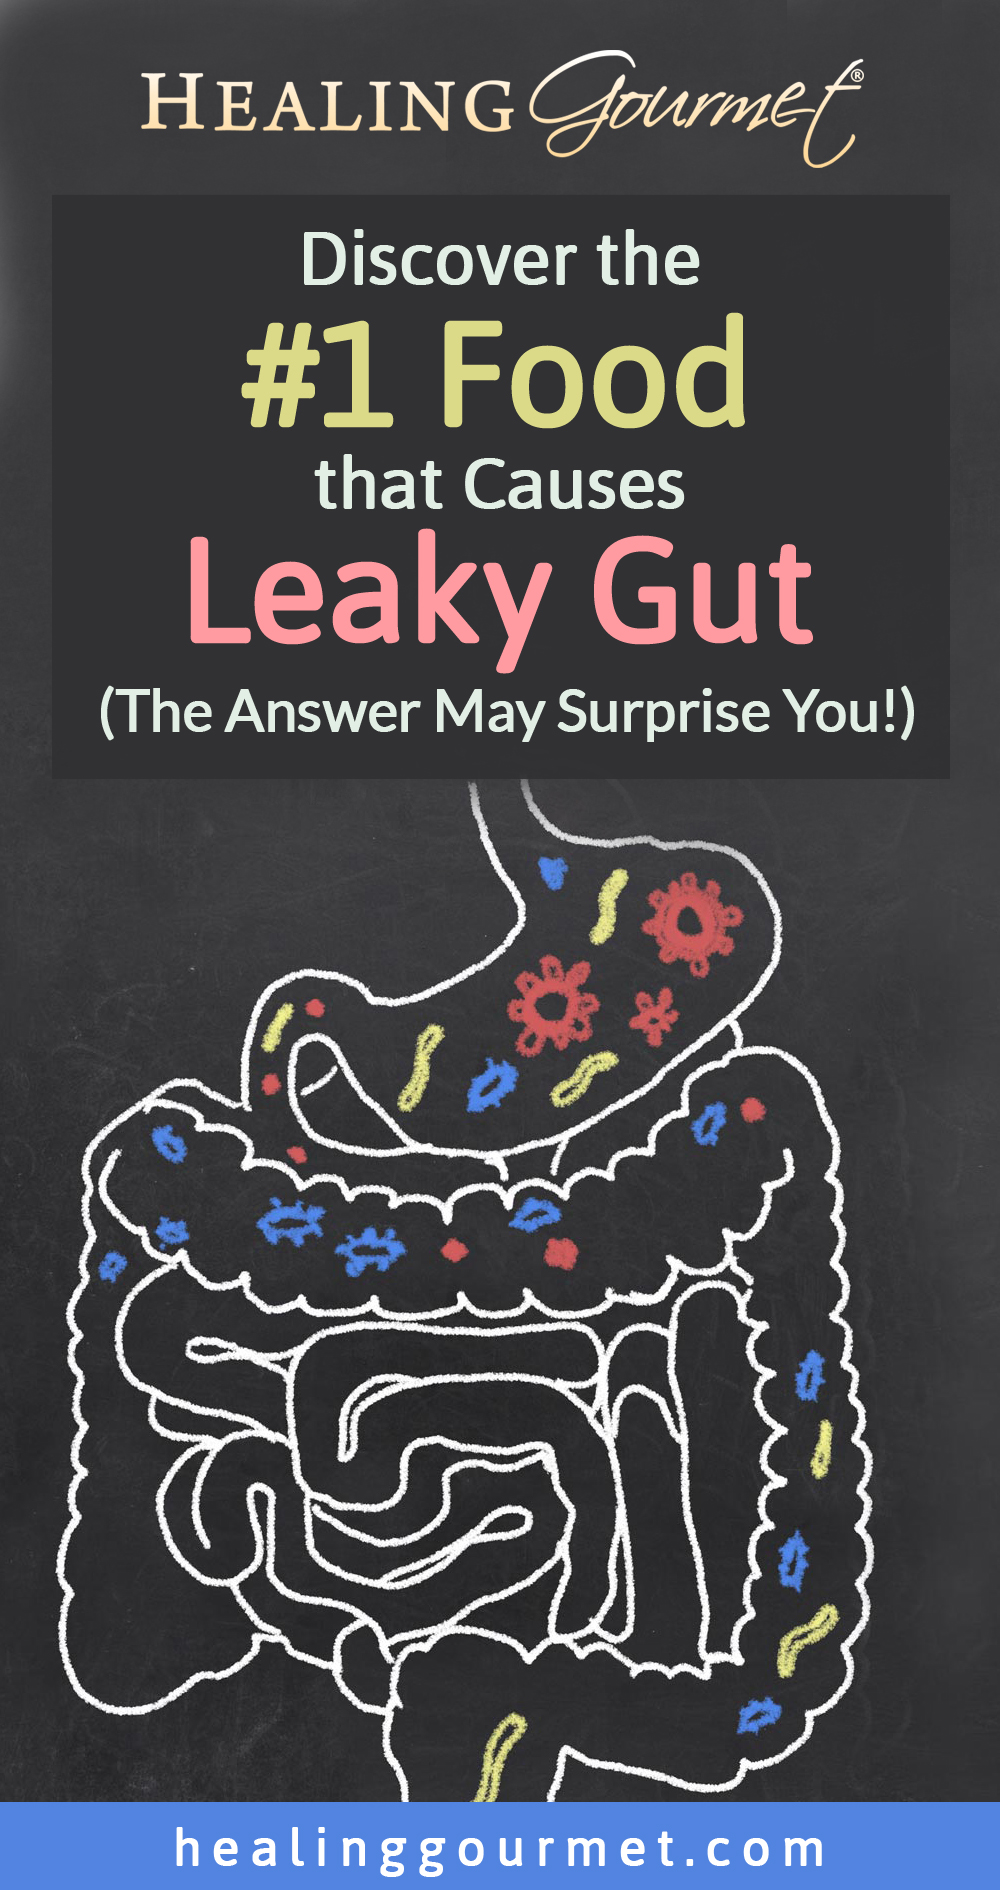 How Gluten Promotes Leaky Gut (Even if You are NOT Gluten Sensitive)